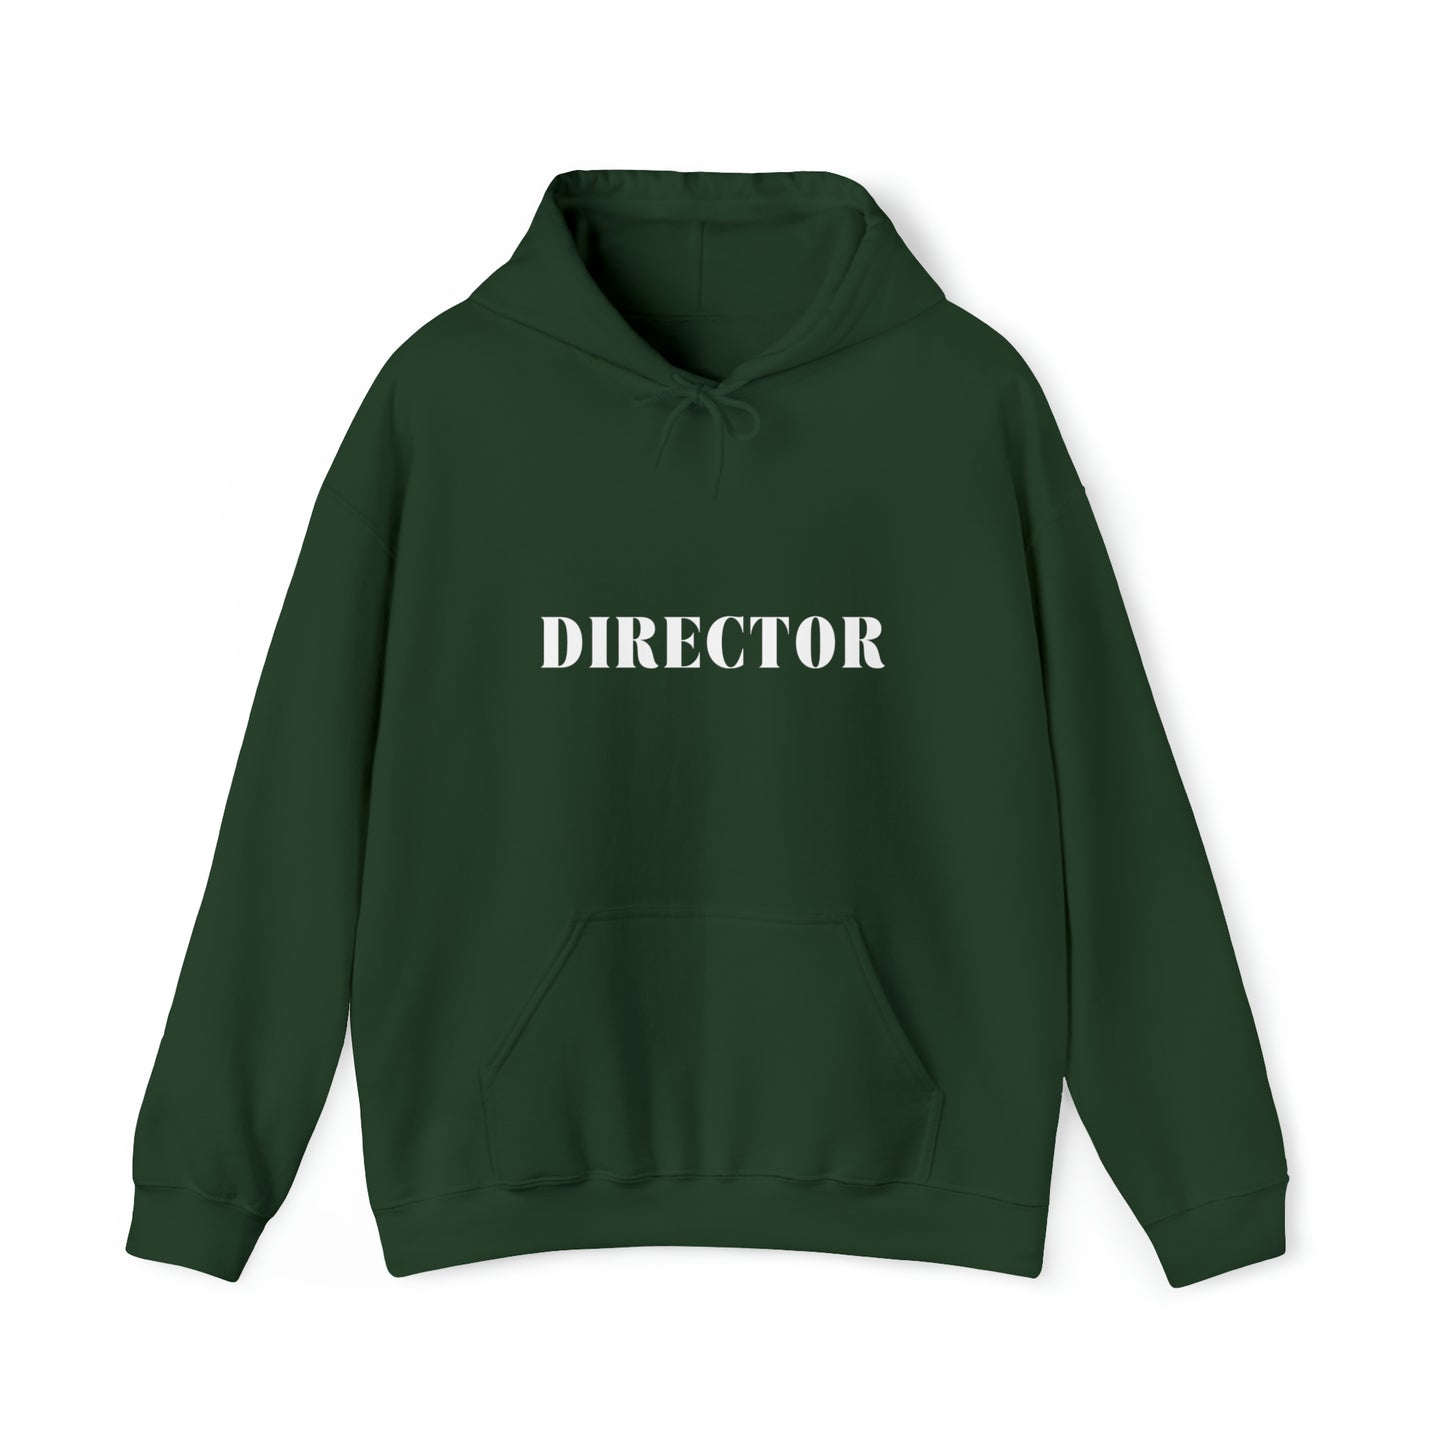 S Forest Green Director Hoodie from HoodySZN.com